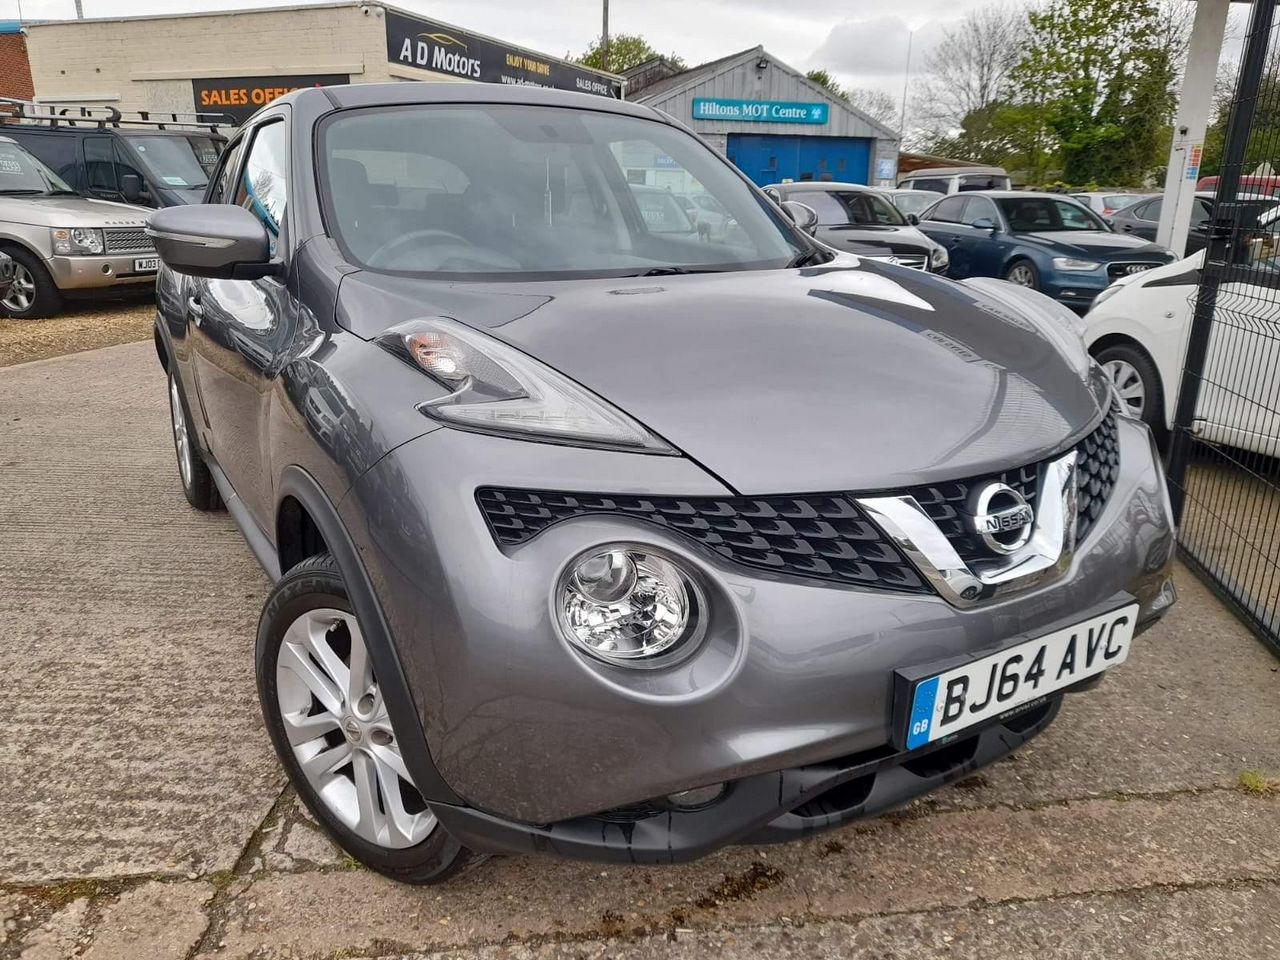 2014 Nissan Juke 1.5 dCi 8v Acenta Euro 5 (s/s) 5dr - Picture 1 of 48